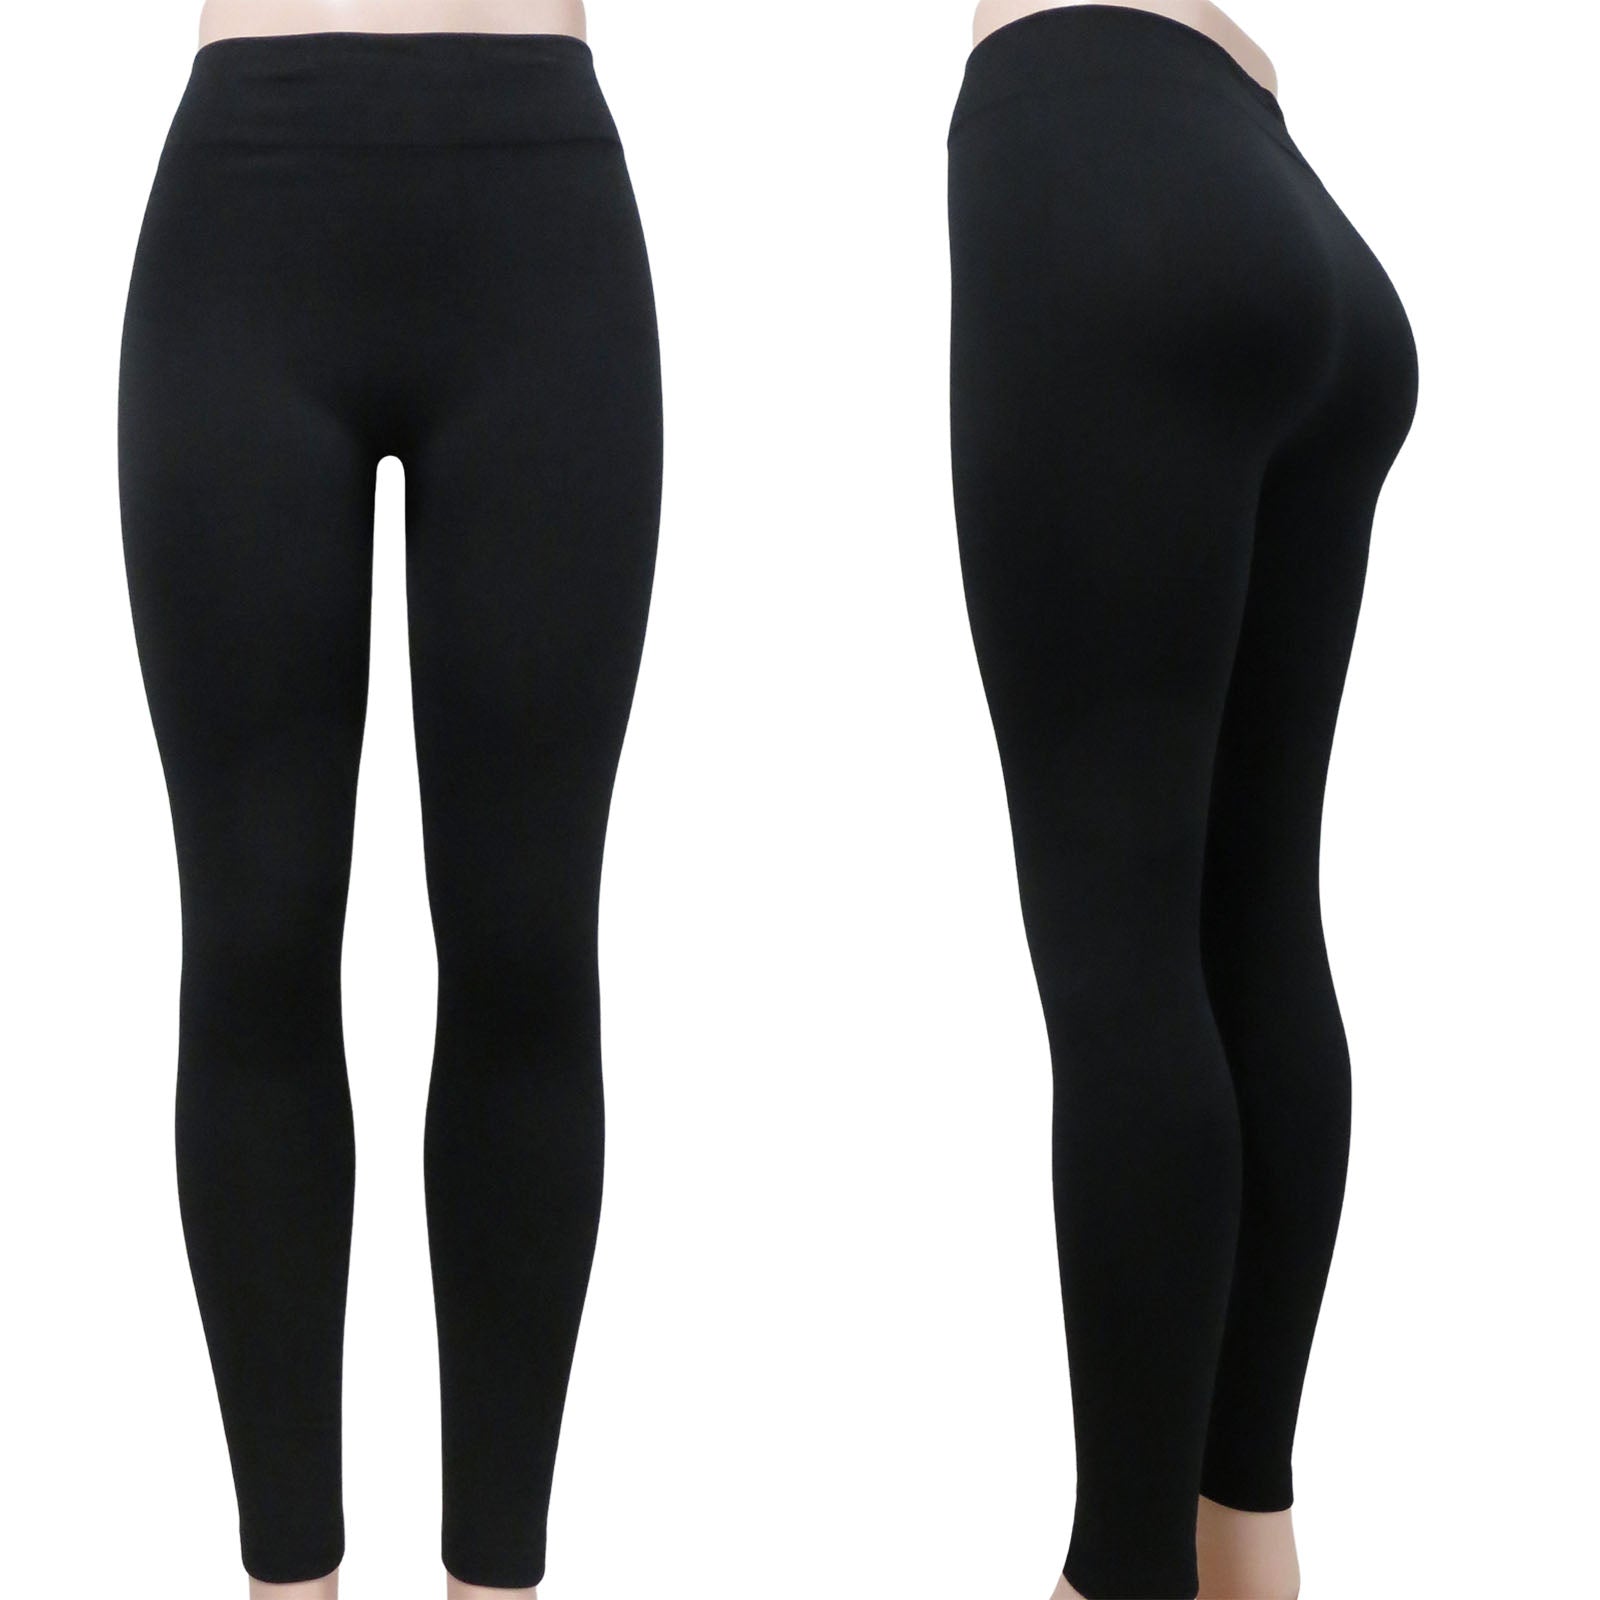 ITEM NUMBER: AP720-THERESA-BLACK (12 PIECE PACK WAS $3.00 - CLEARANCE JUST  $2.00 / PIECE) WHOLESALE BLACK FLEECE LINED LEGGINGS